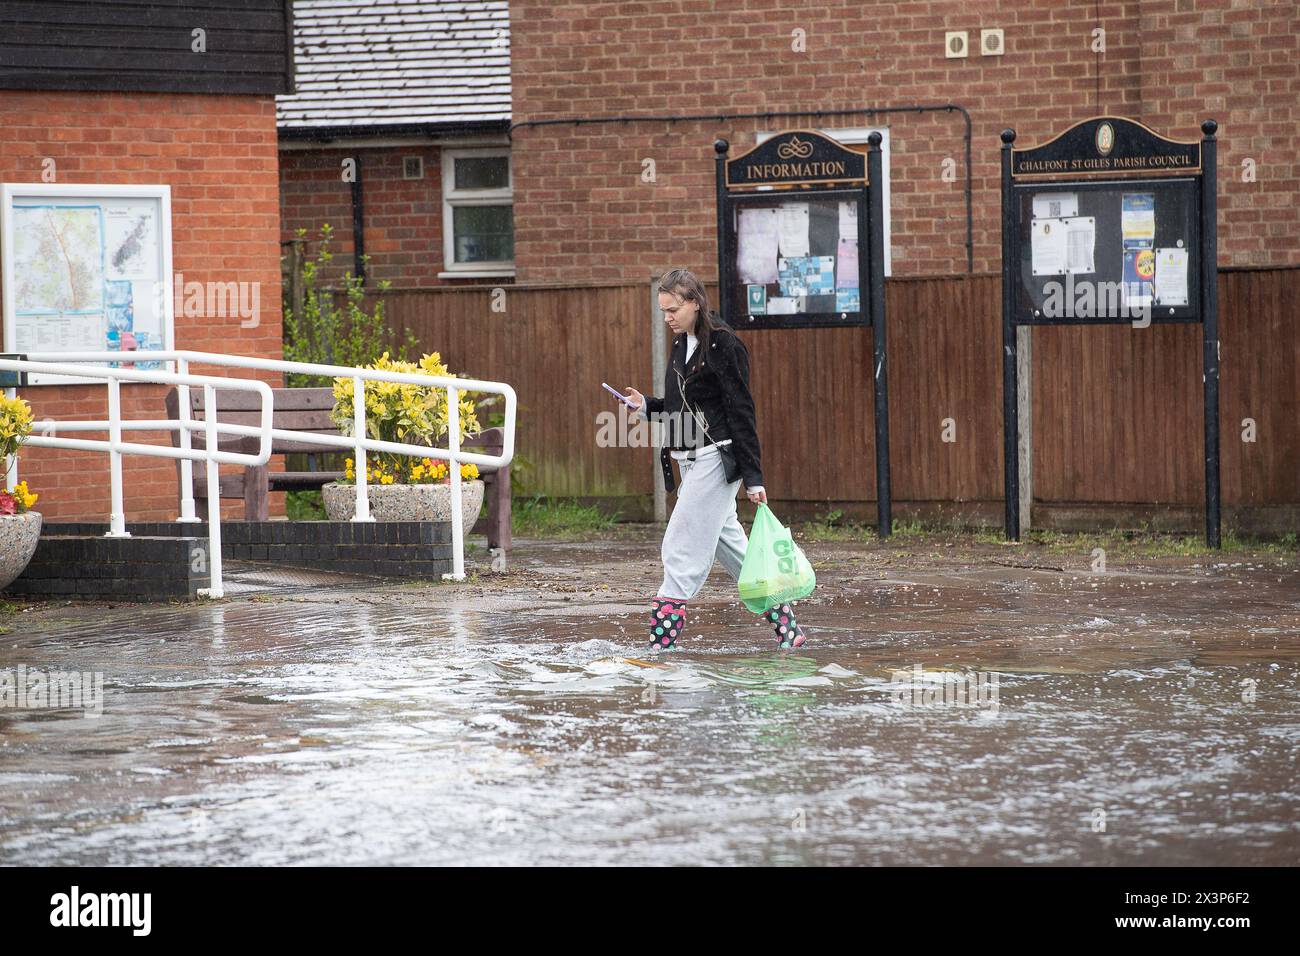 Chalfont St Giles, Buckinghamshire, UK. 28th April, 2024. A pedestrian walks through floodwater. Parts of the village of Chalfont St Giles in Buckinghamshire was flooded again today after heavy overnight rain. There are ongoing issues with groundwater flooding across the Chalfonts. Credit: Maureen McLean/Alamy Live News Stock Photo